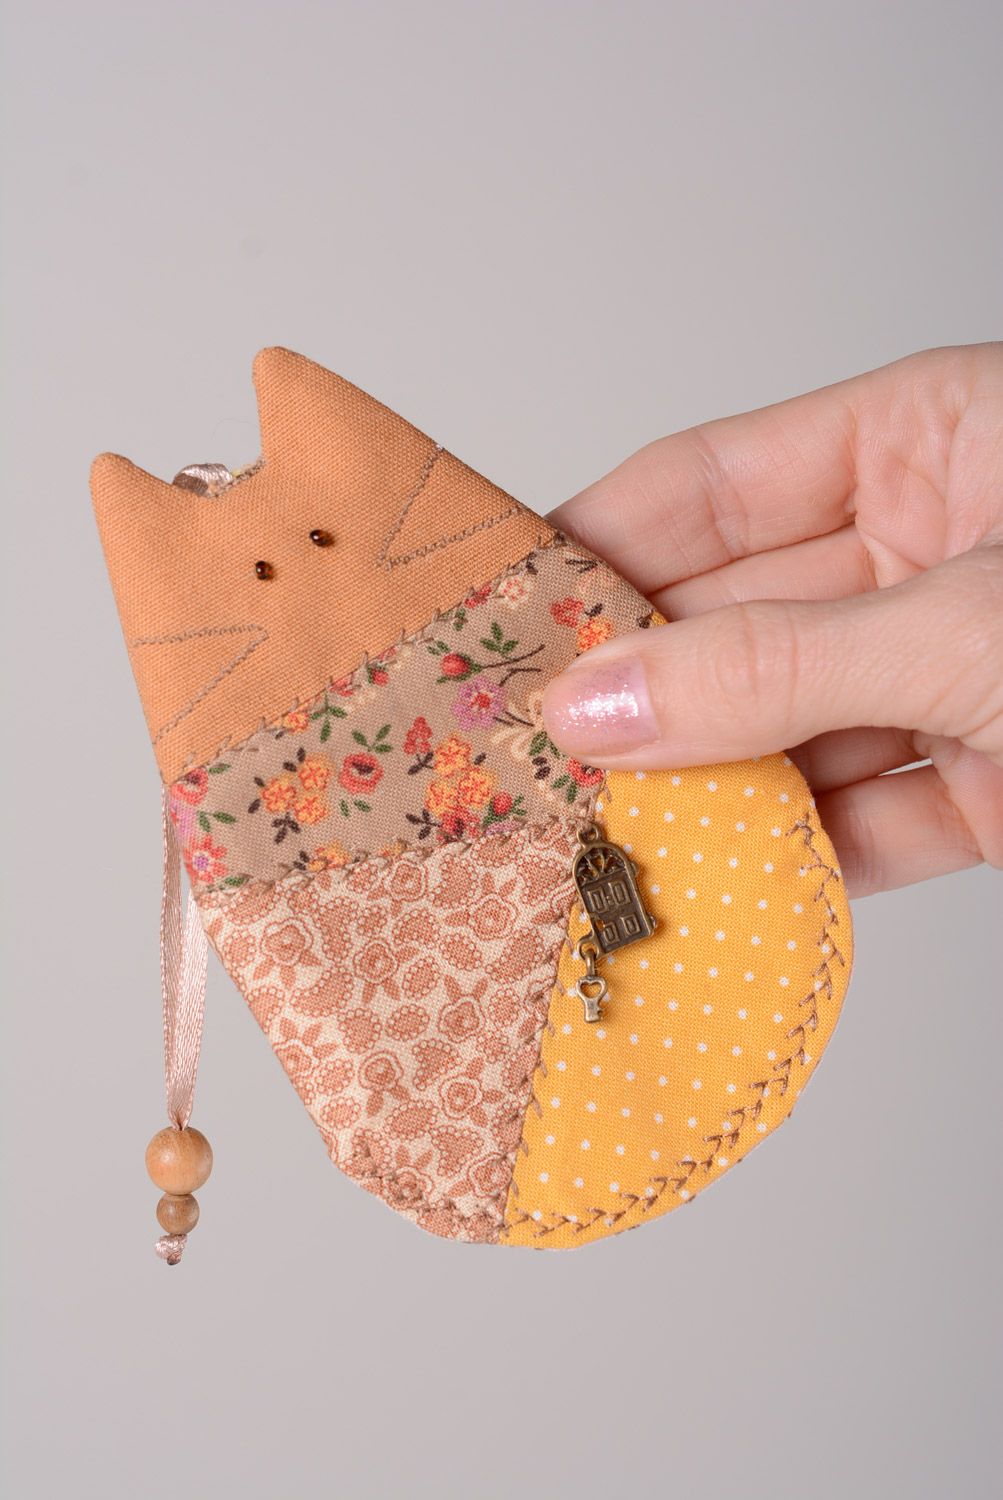 Handmade designer key case sewn of cotton fabric in the shape of a kitten photo 3